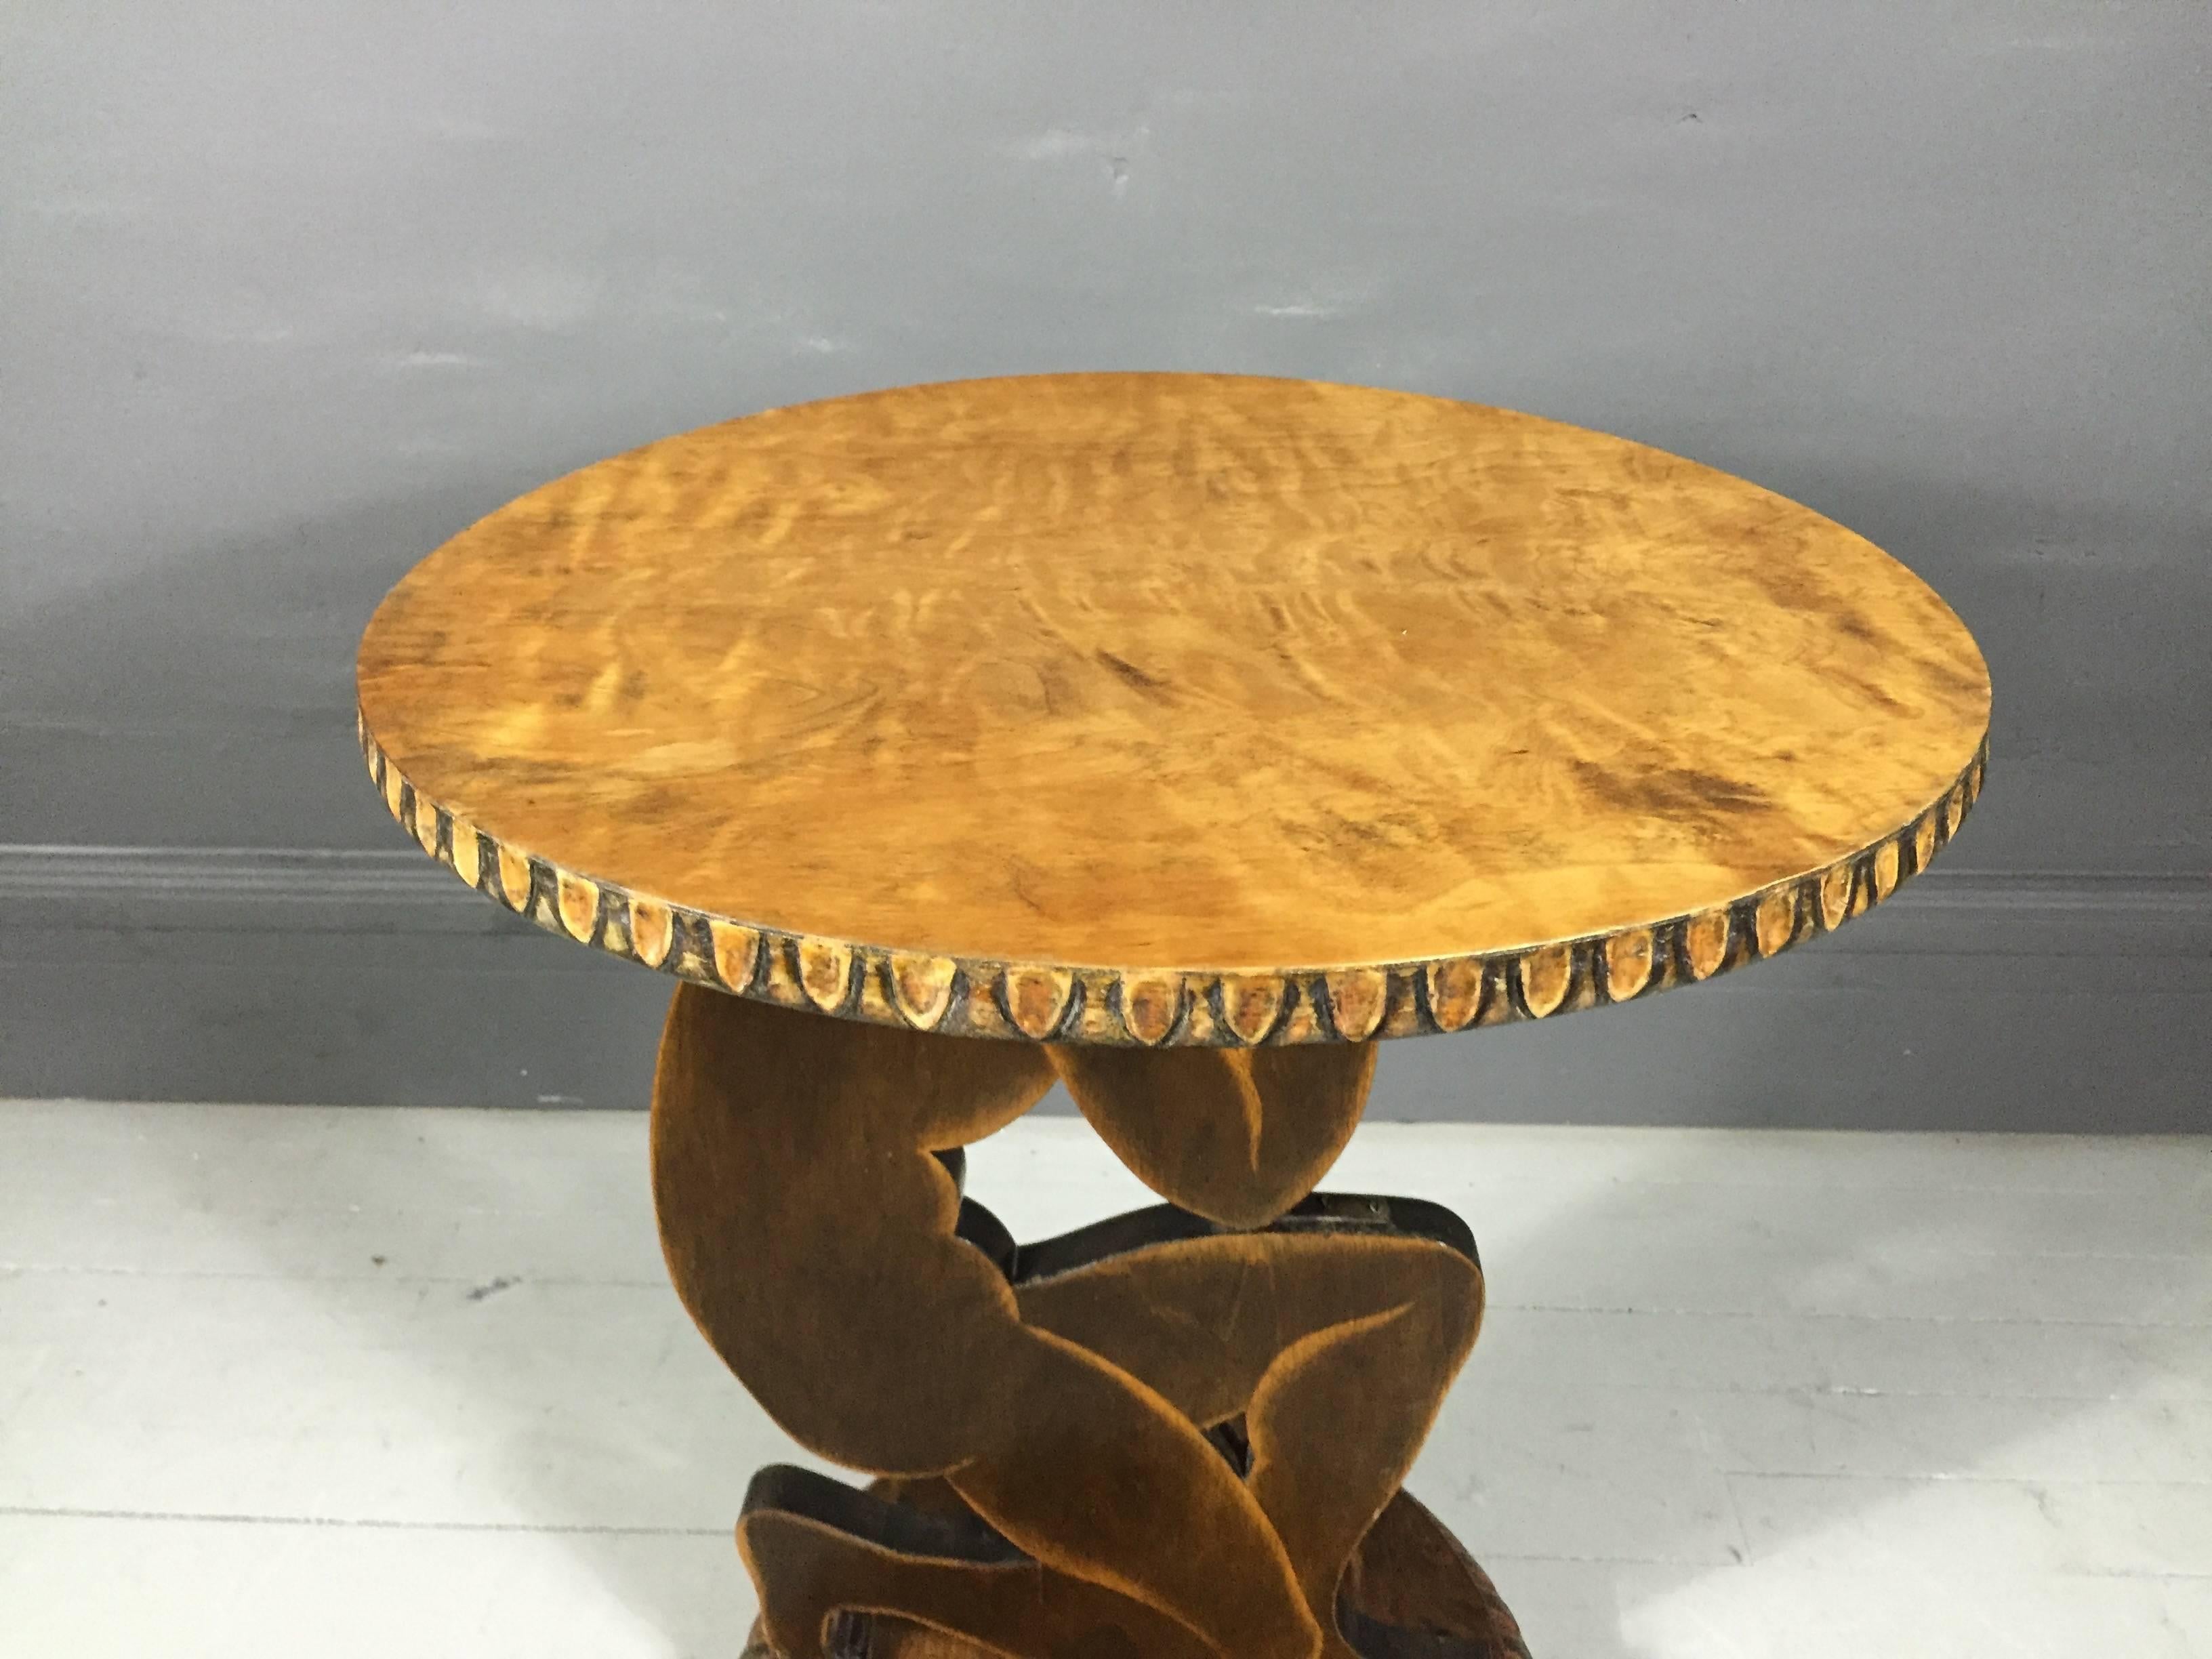 A spectacular and rare side table in birch wood carved in a female figure holding a light stained and decorated round disk or top, France, circa 1920s.

Wonderful vintage condition.  Slight bow to edge of table top.